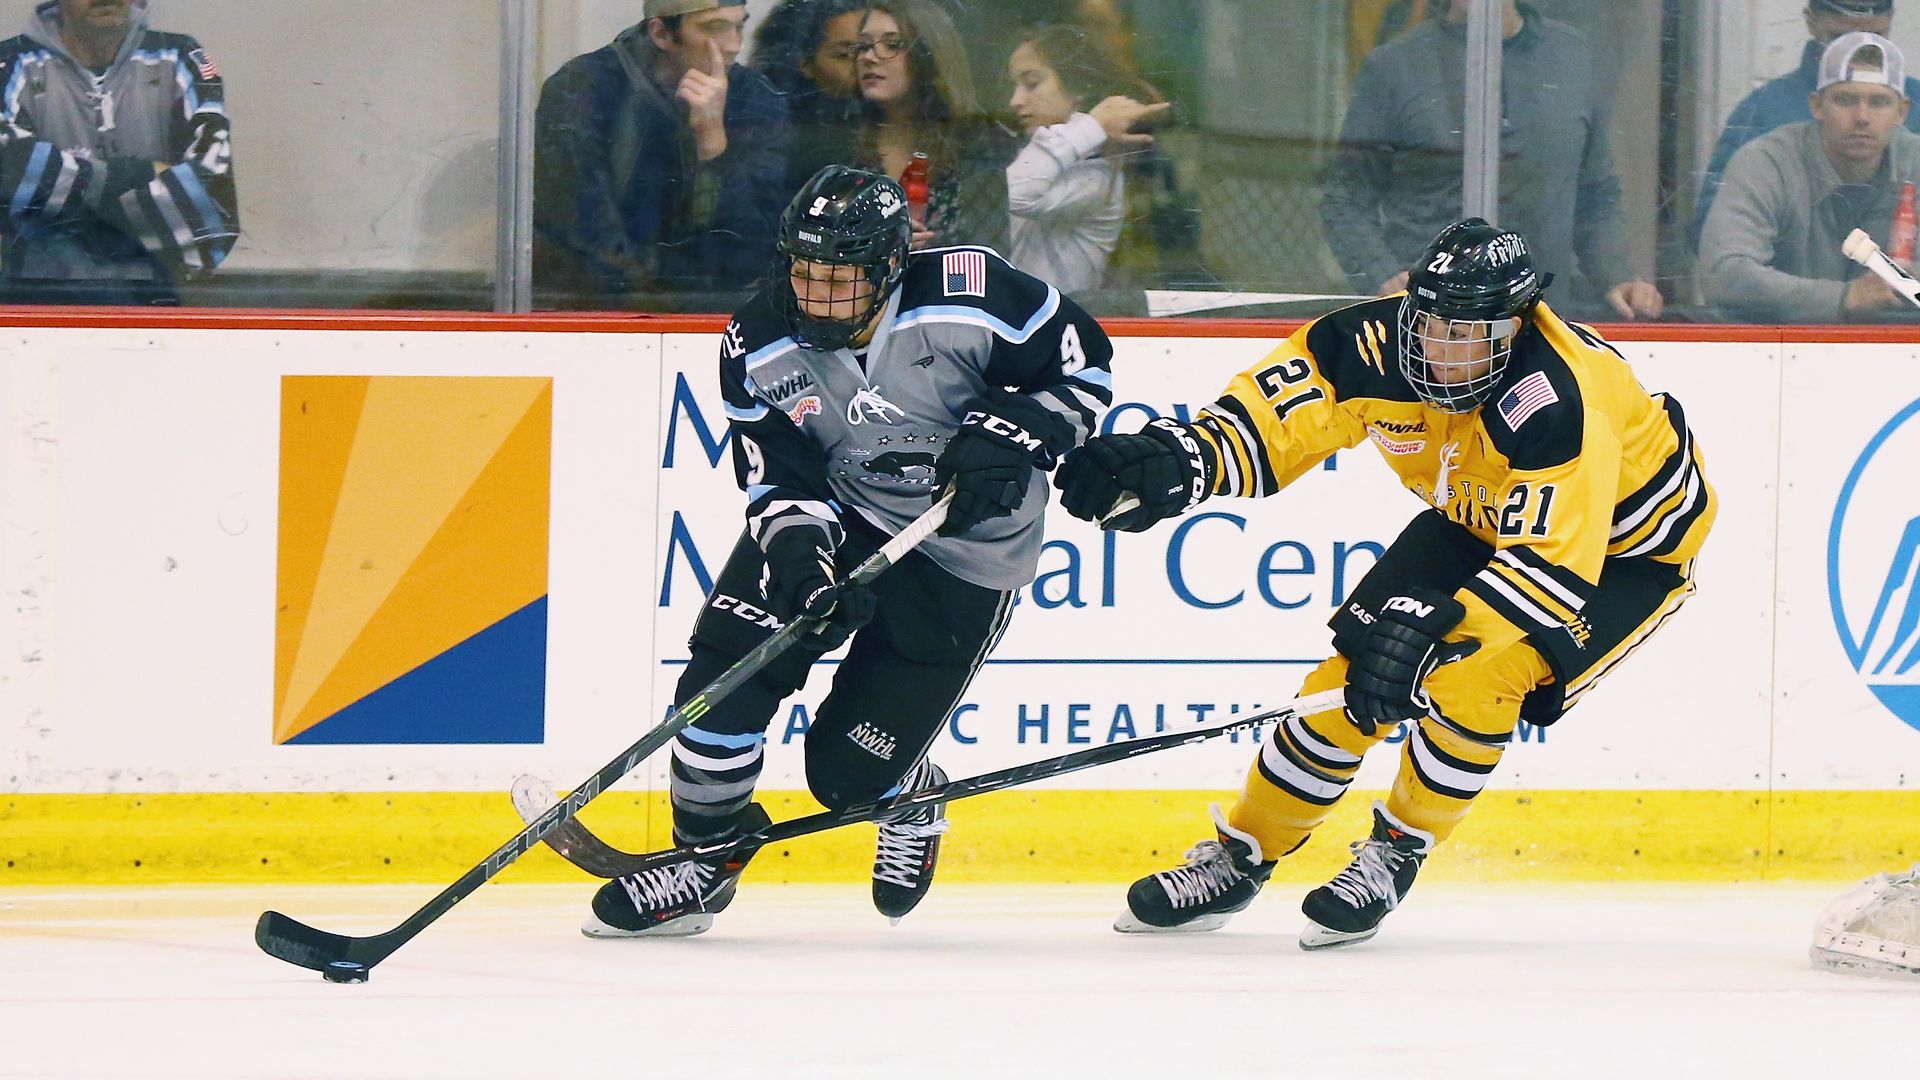 Megan Bozek #9 of the Buffalo Beauts plays the puck while being defended by Hilary Knight #21